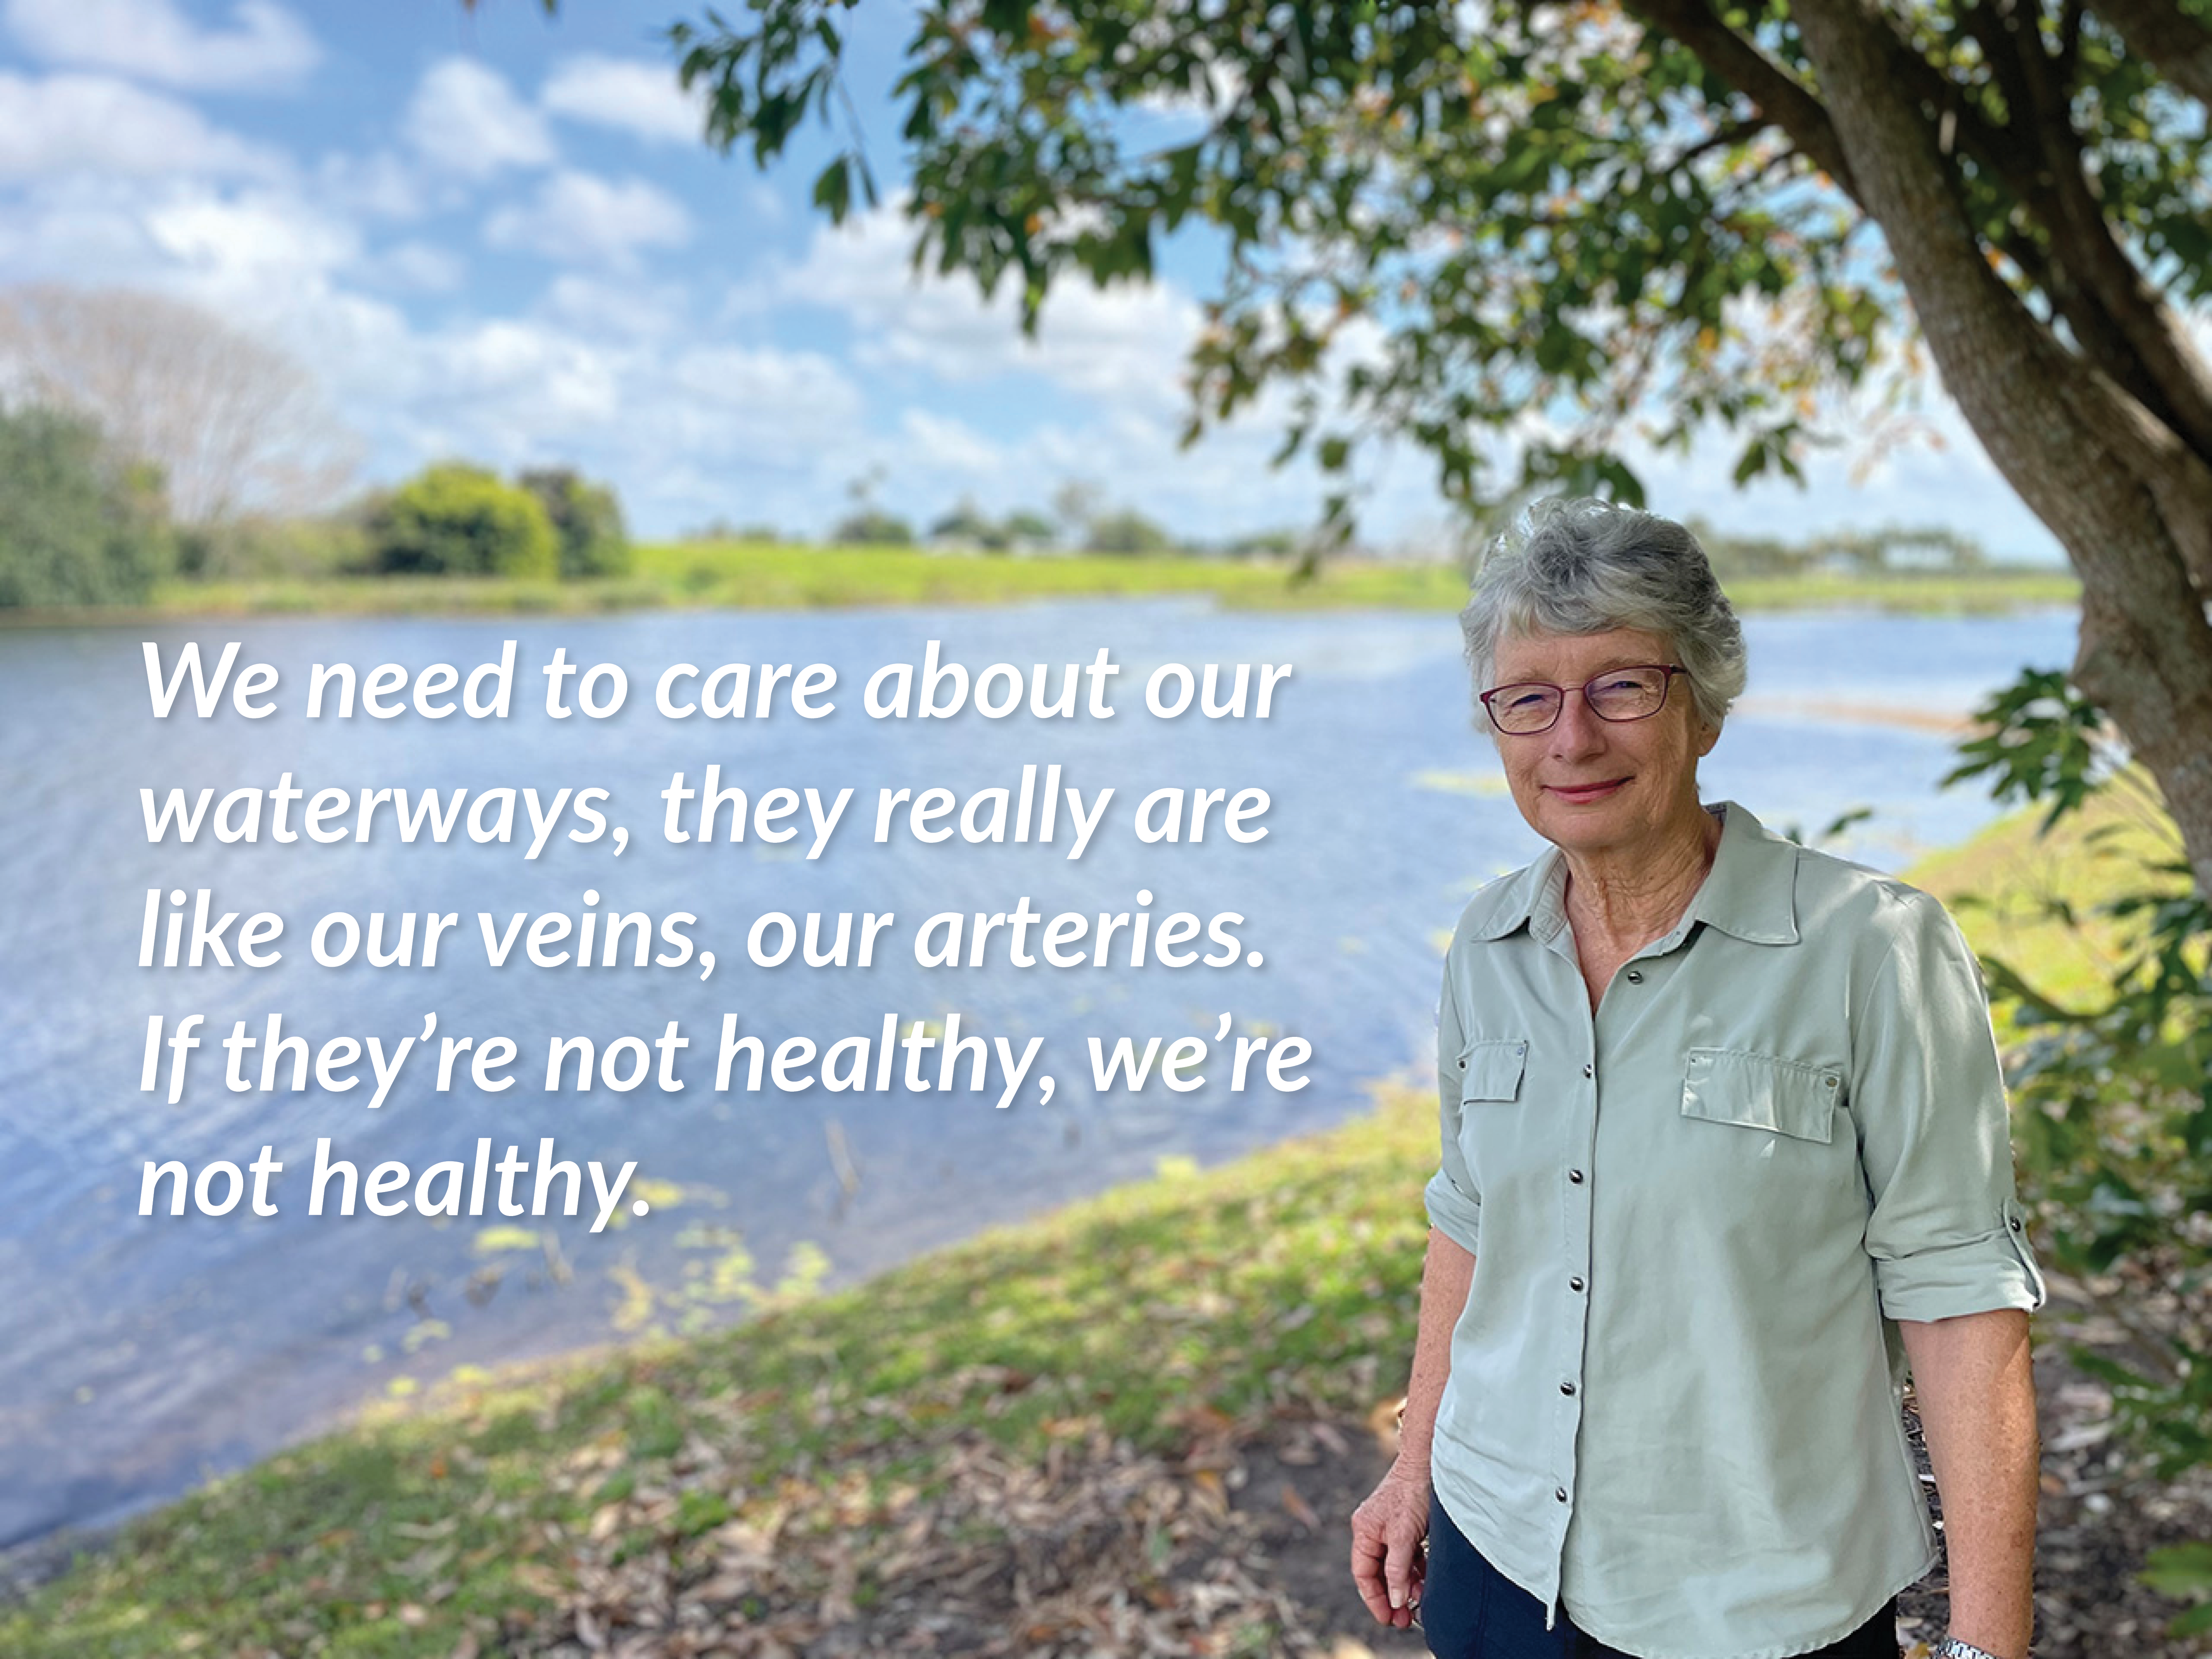 Judith stands in front of a waterway, with the following quote: We need to care about our waterways, they really are like our veins, our arteries. If they're not healthy, we're not healthy.